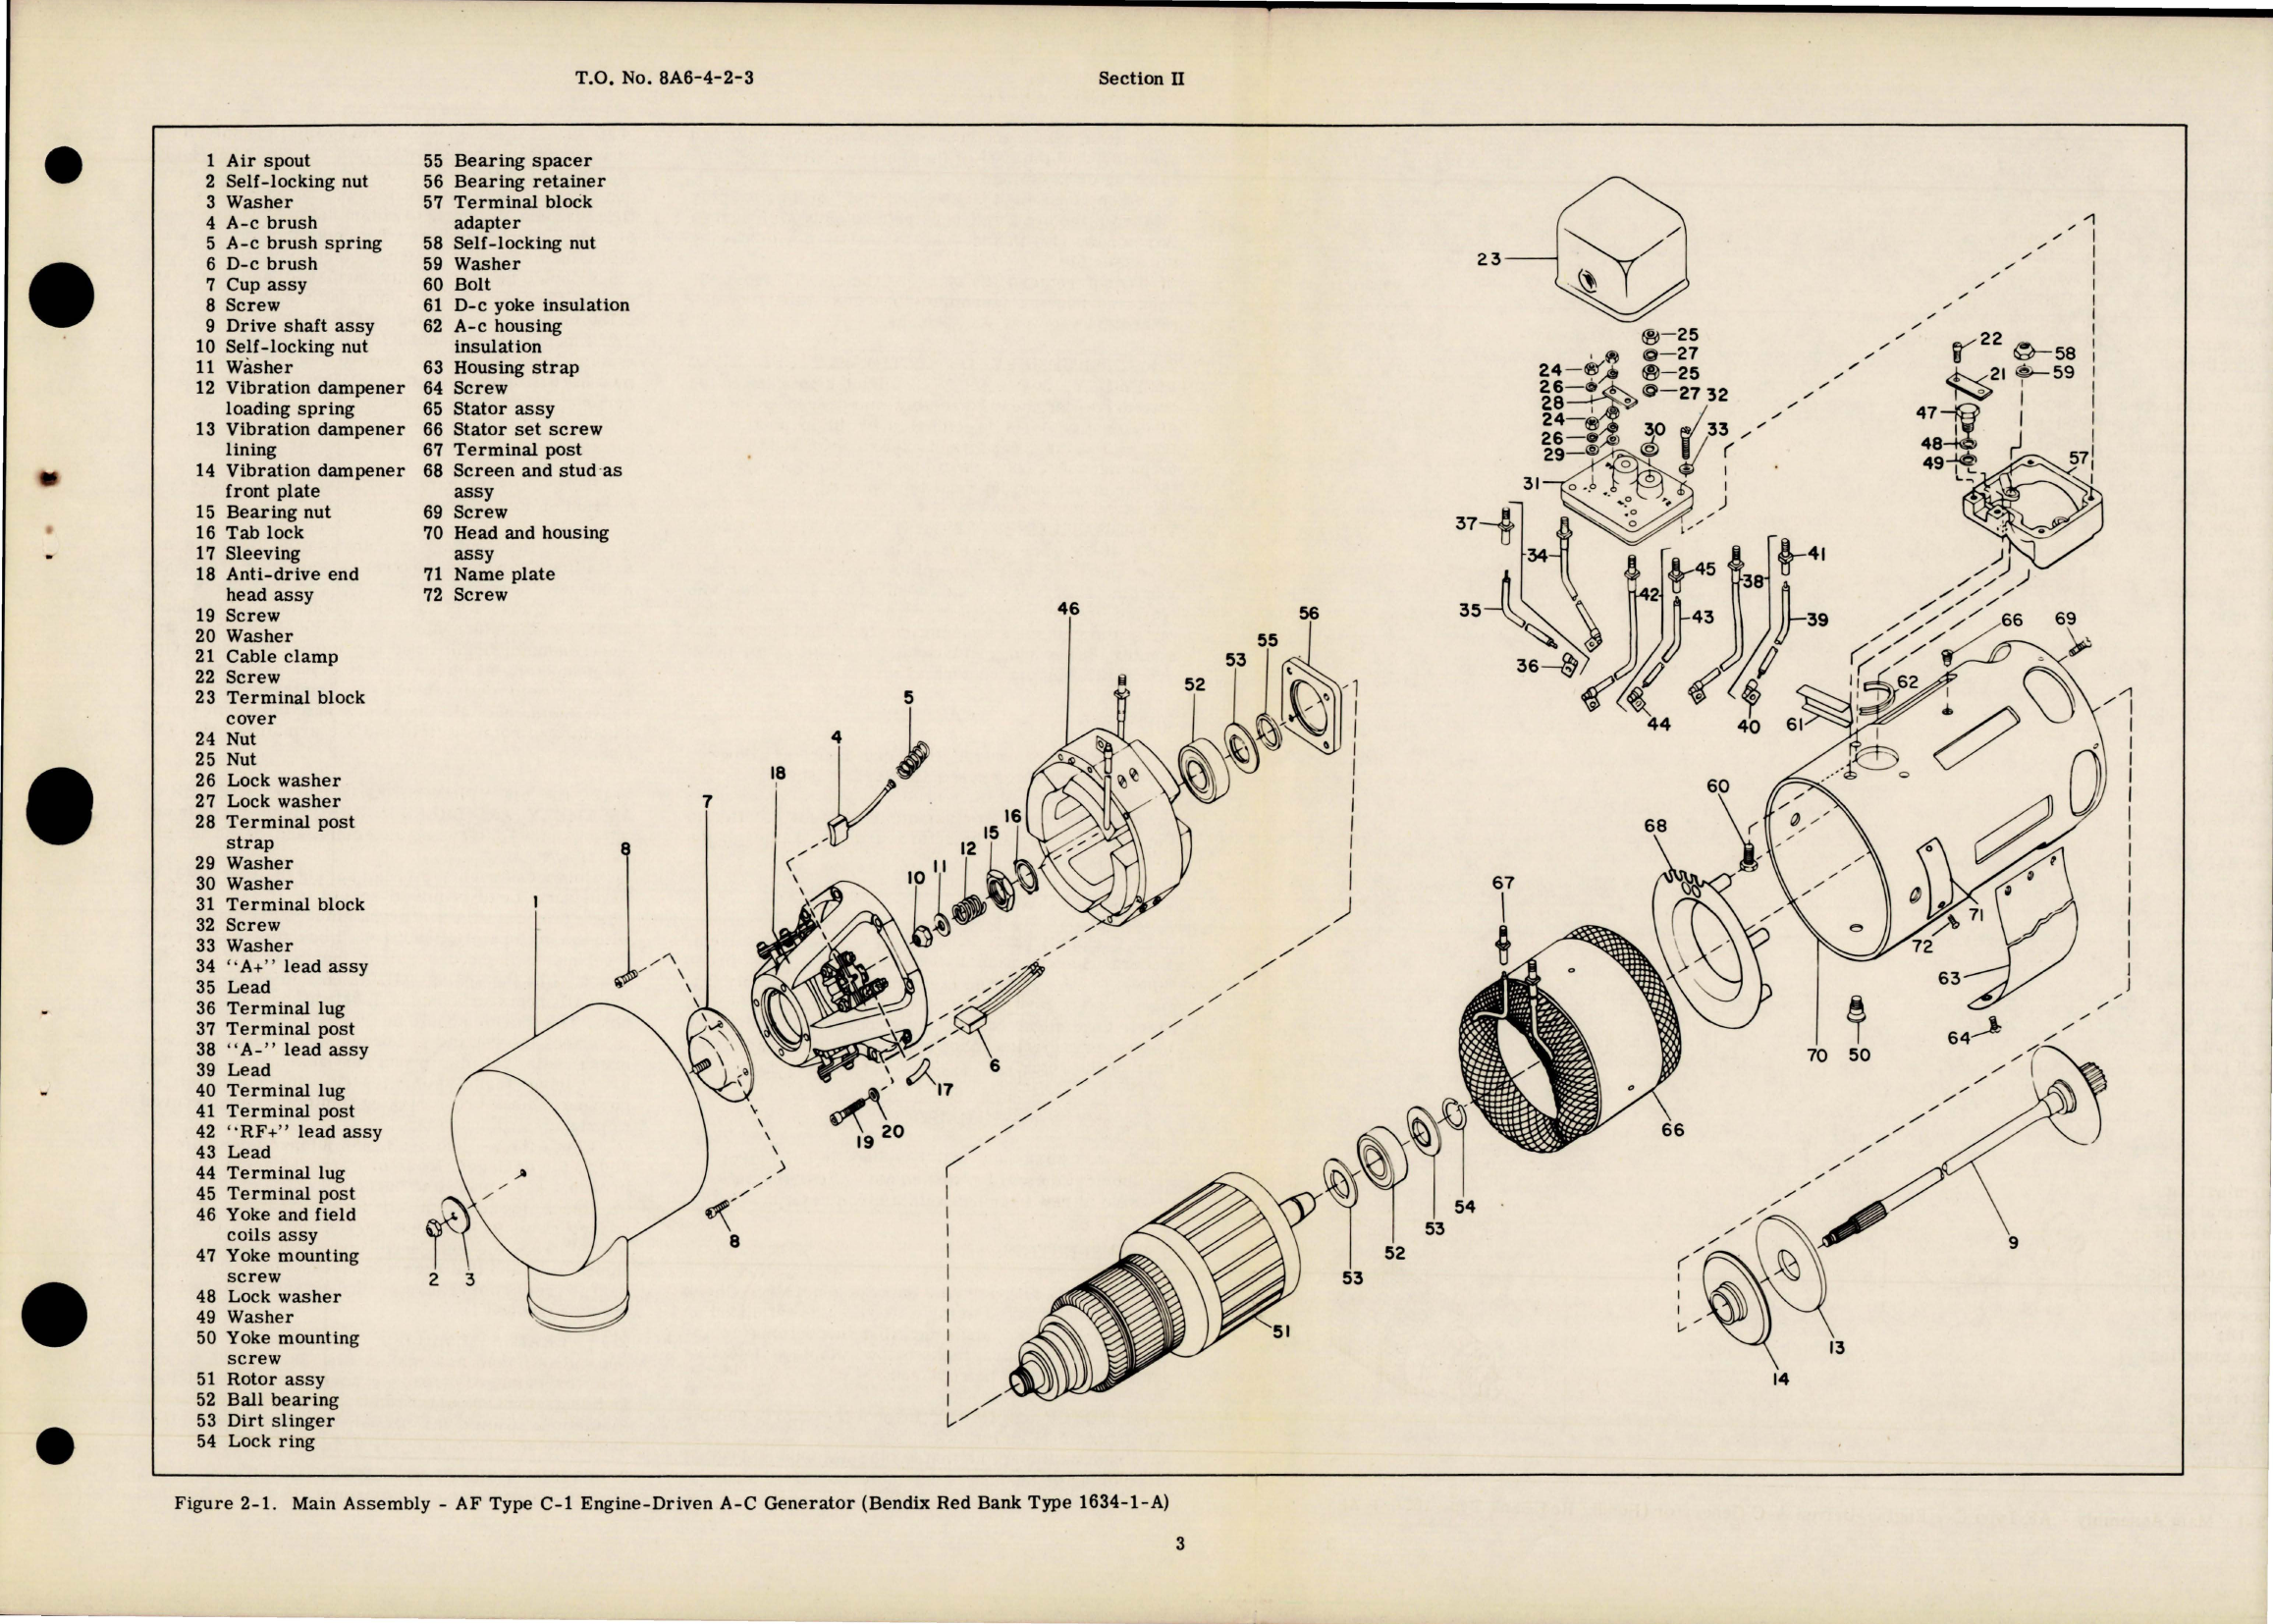 Sample page 7 from AirCorps Library document: Overhaul Instructions for Engine Driven AC Generators AF Types C-1 and C-3, Navy Type NEA-10 